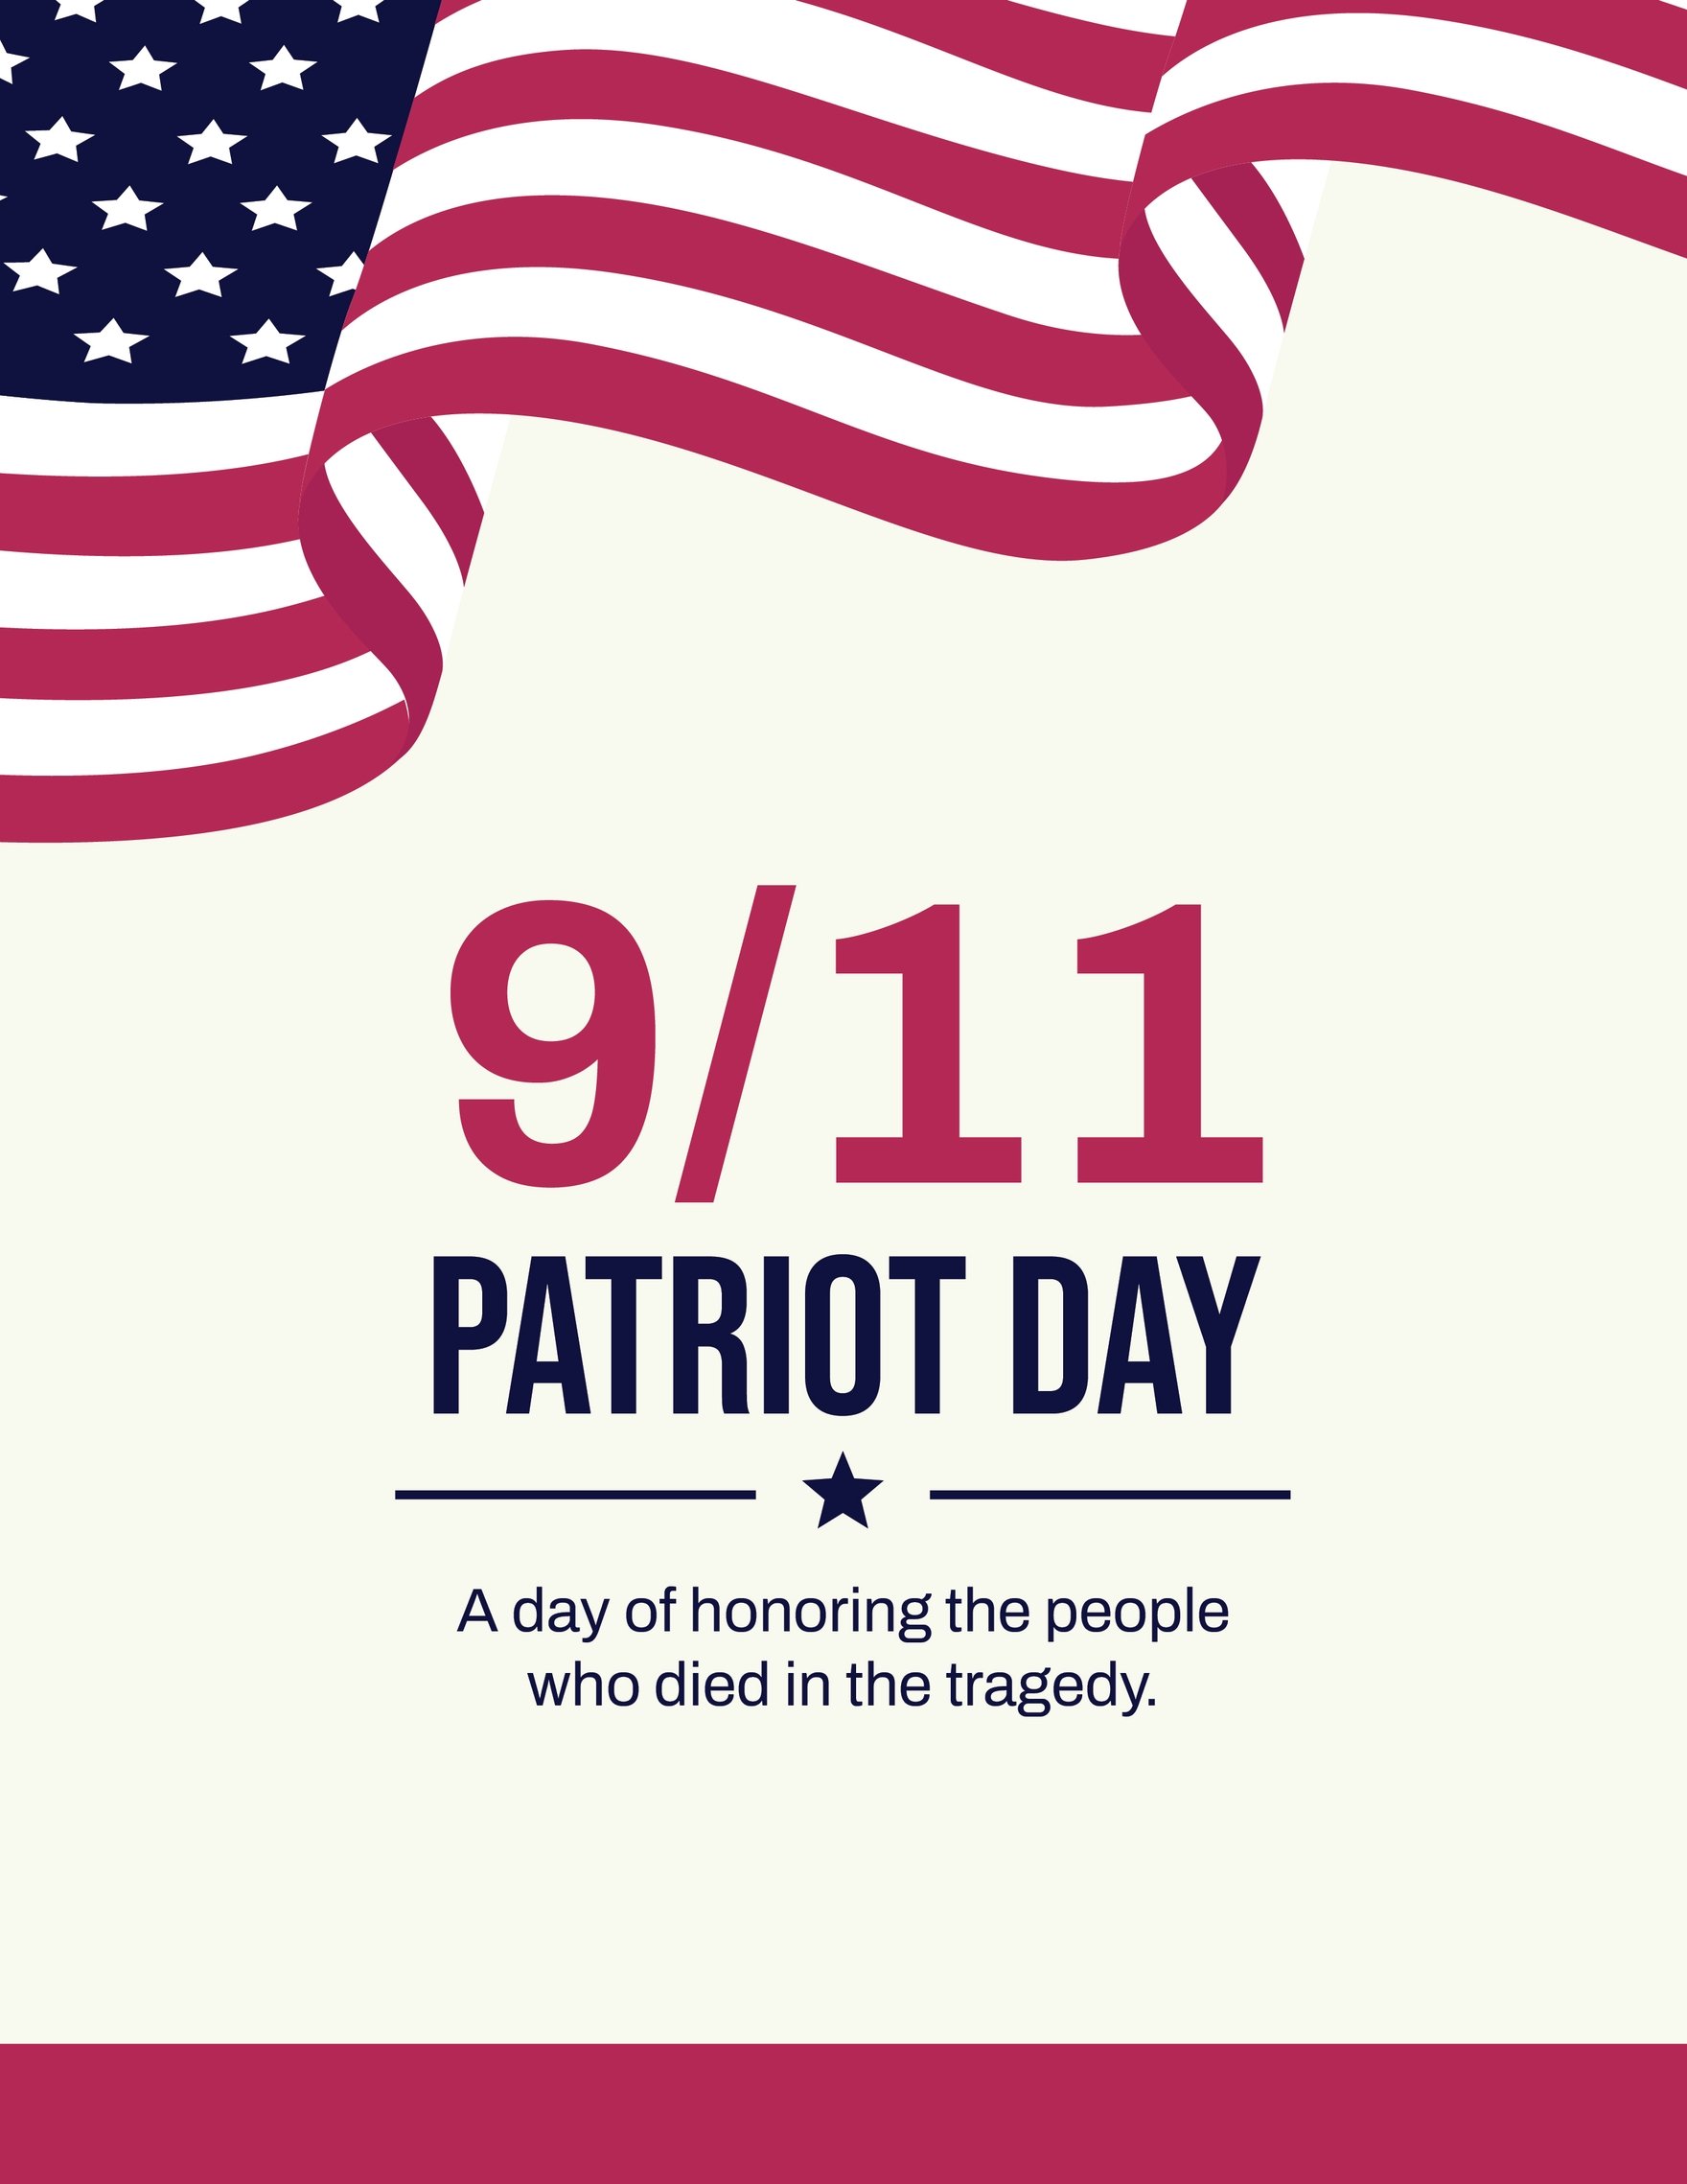 Free Modern Patriot Day Flyer Template in Word, Google Docs, Illustrator, PSD, Apple Pages, Publisher